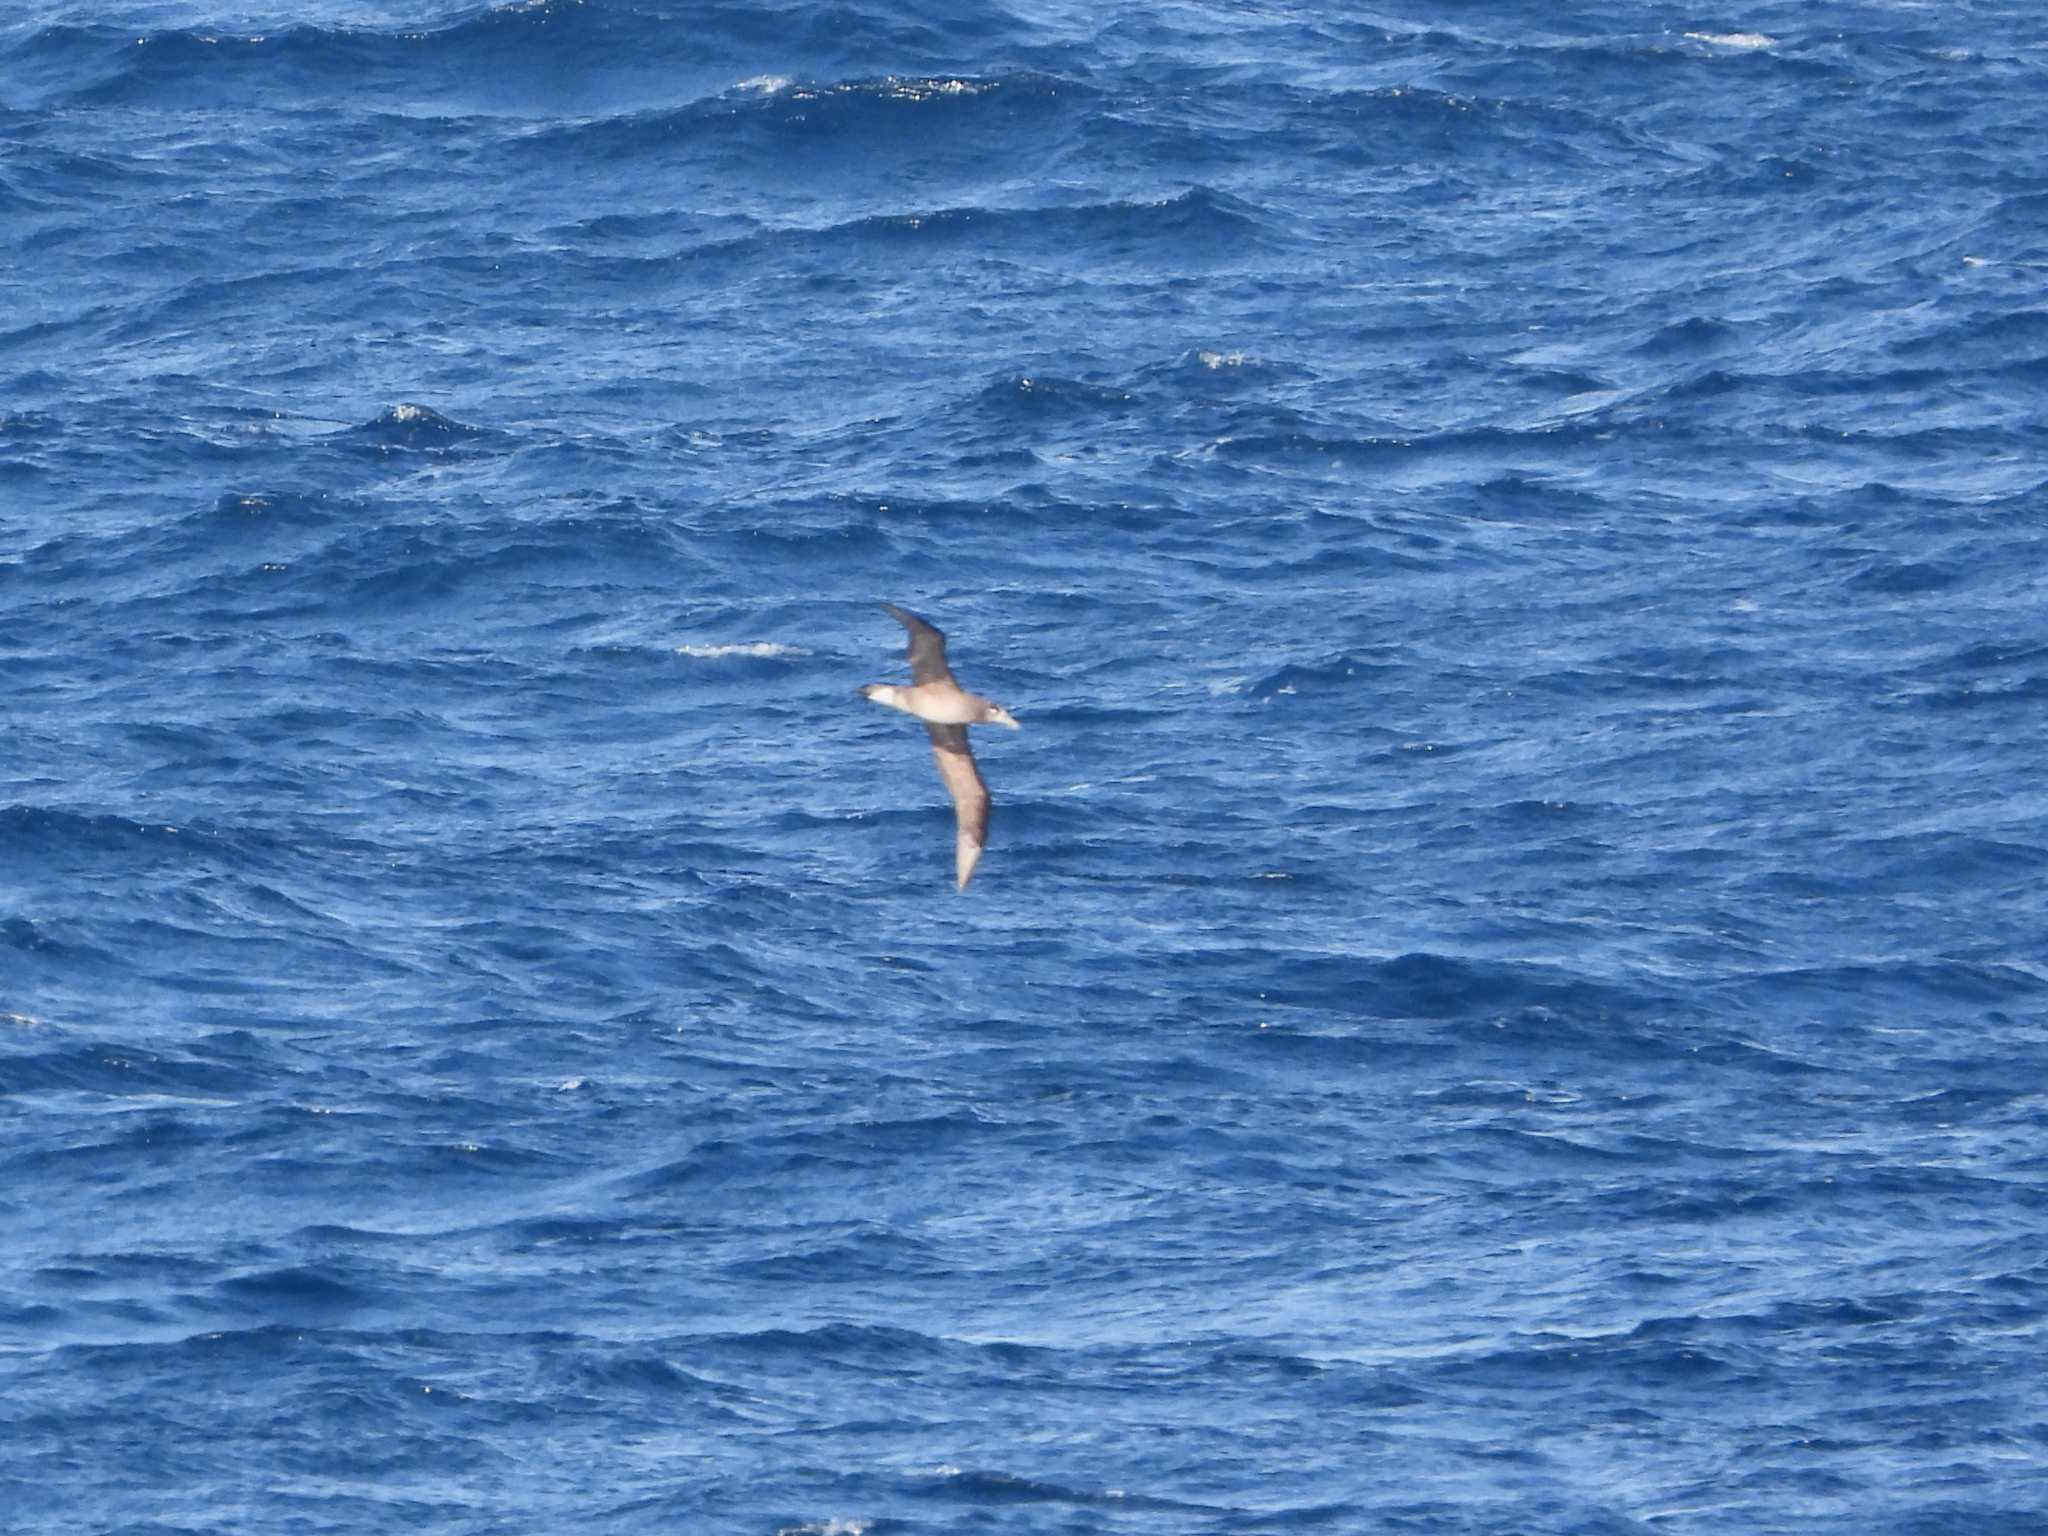 Photo of Black-footed Albatross at 大洗-苫小牧航路 by 𝕲𝖗𝖊𝖞 𝕳𝖊𝖗𝖔𝖓